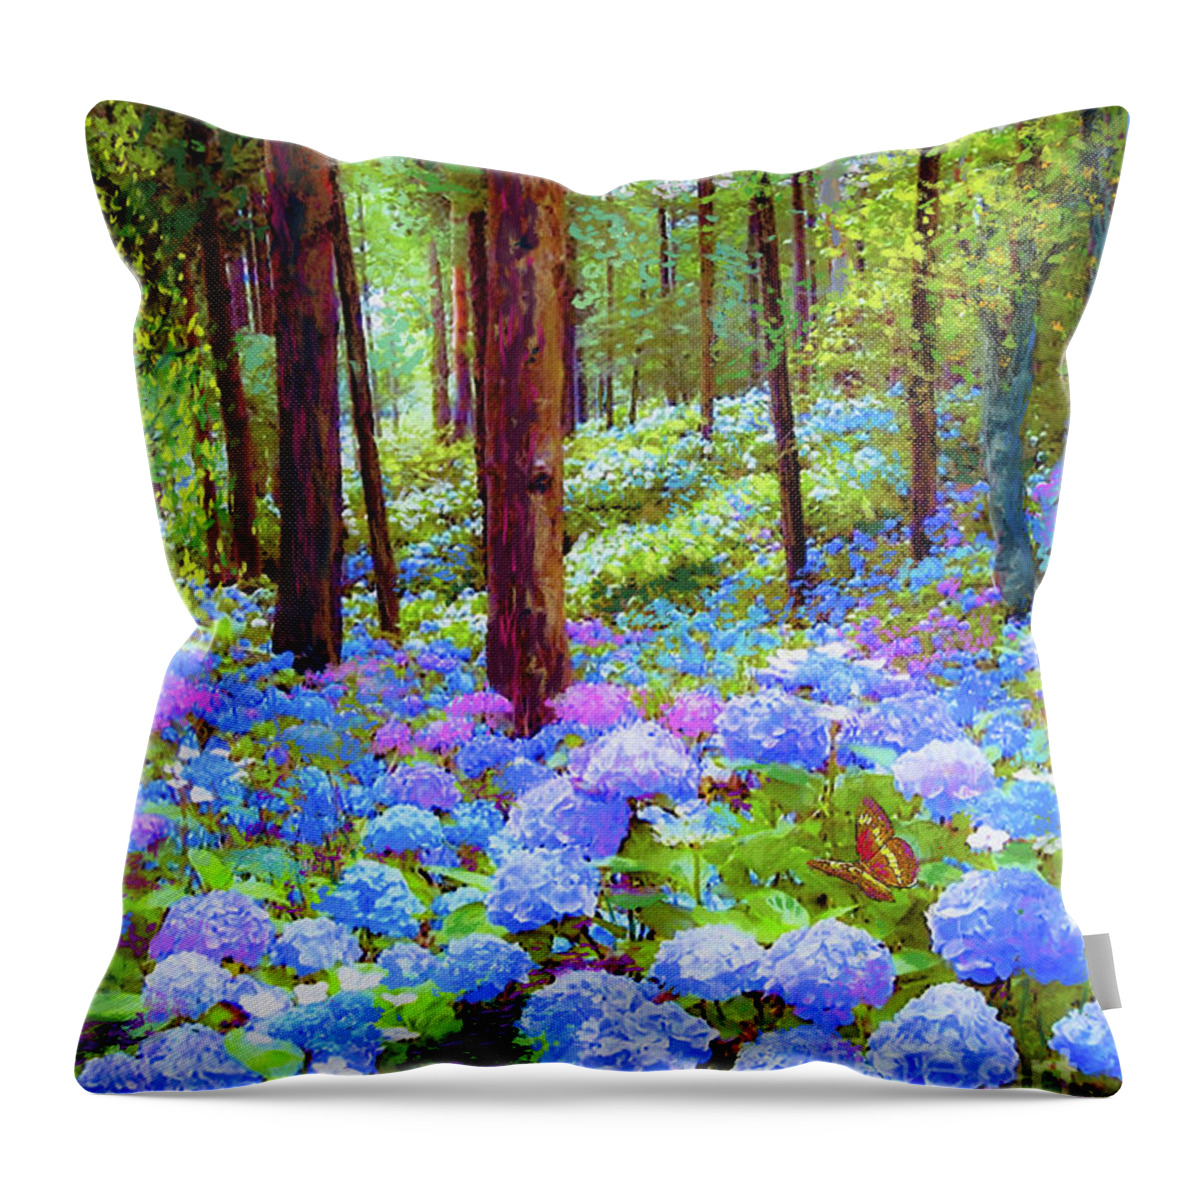 Landscape Throw Pillow featuring the painting Endless Summer Blue Hydrangeas by Jane Small